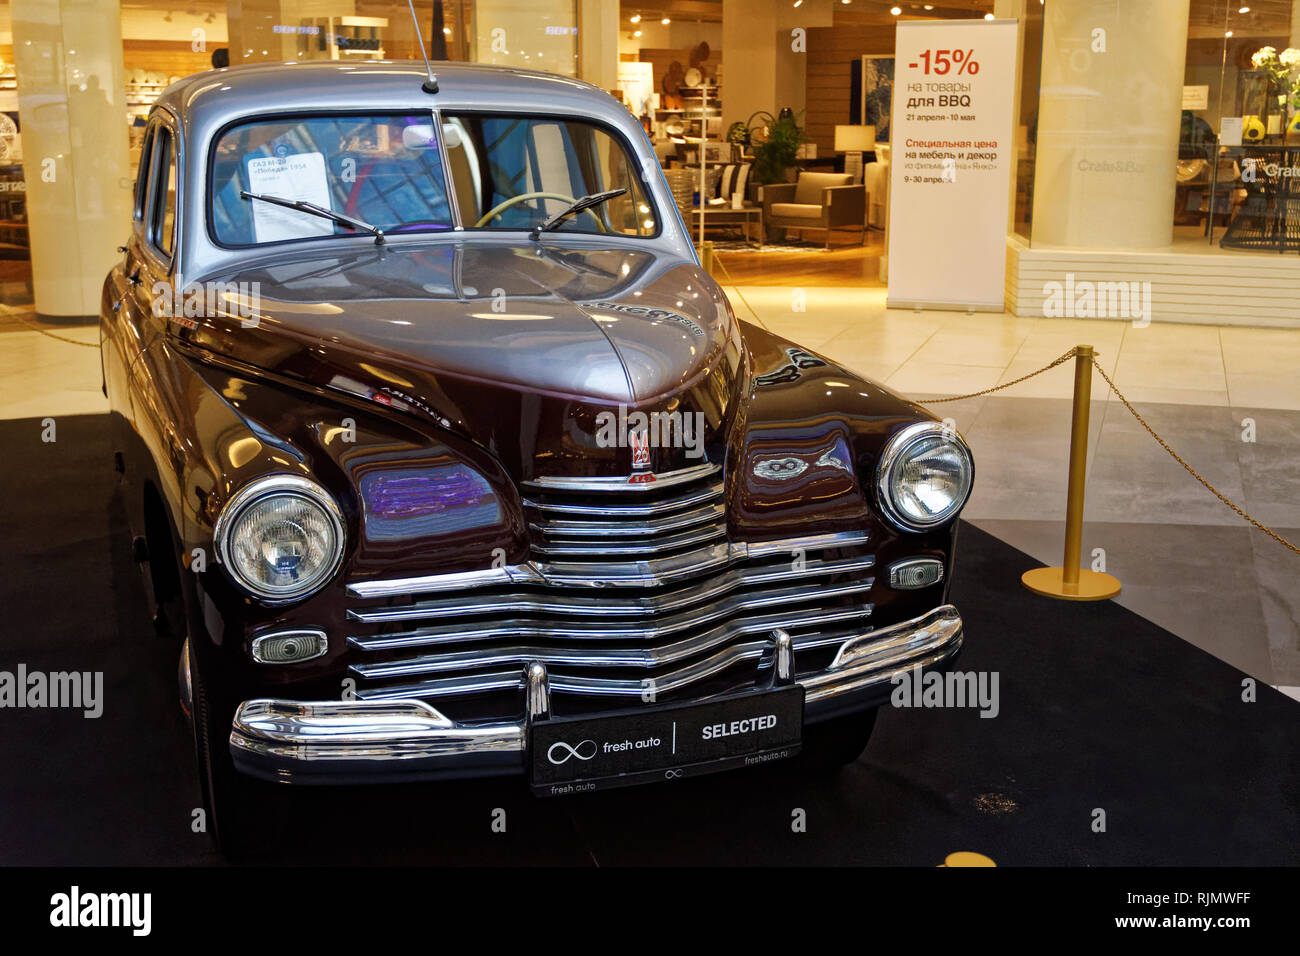 Gaz M20 Pobeda High Resolution Stock Photography and Images - Alamy